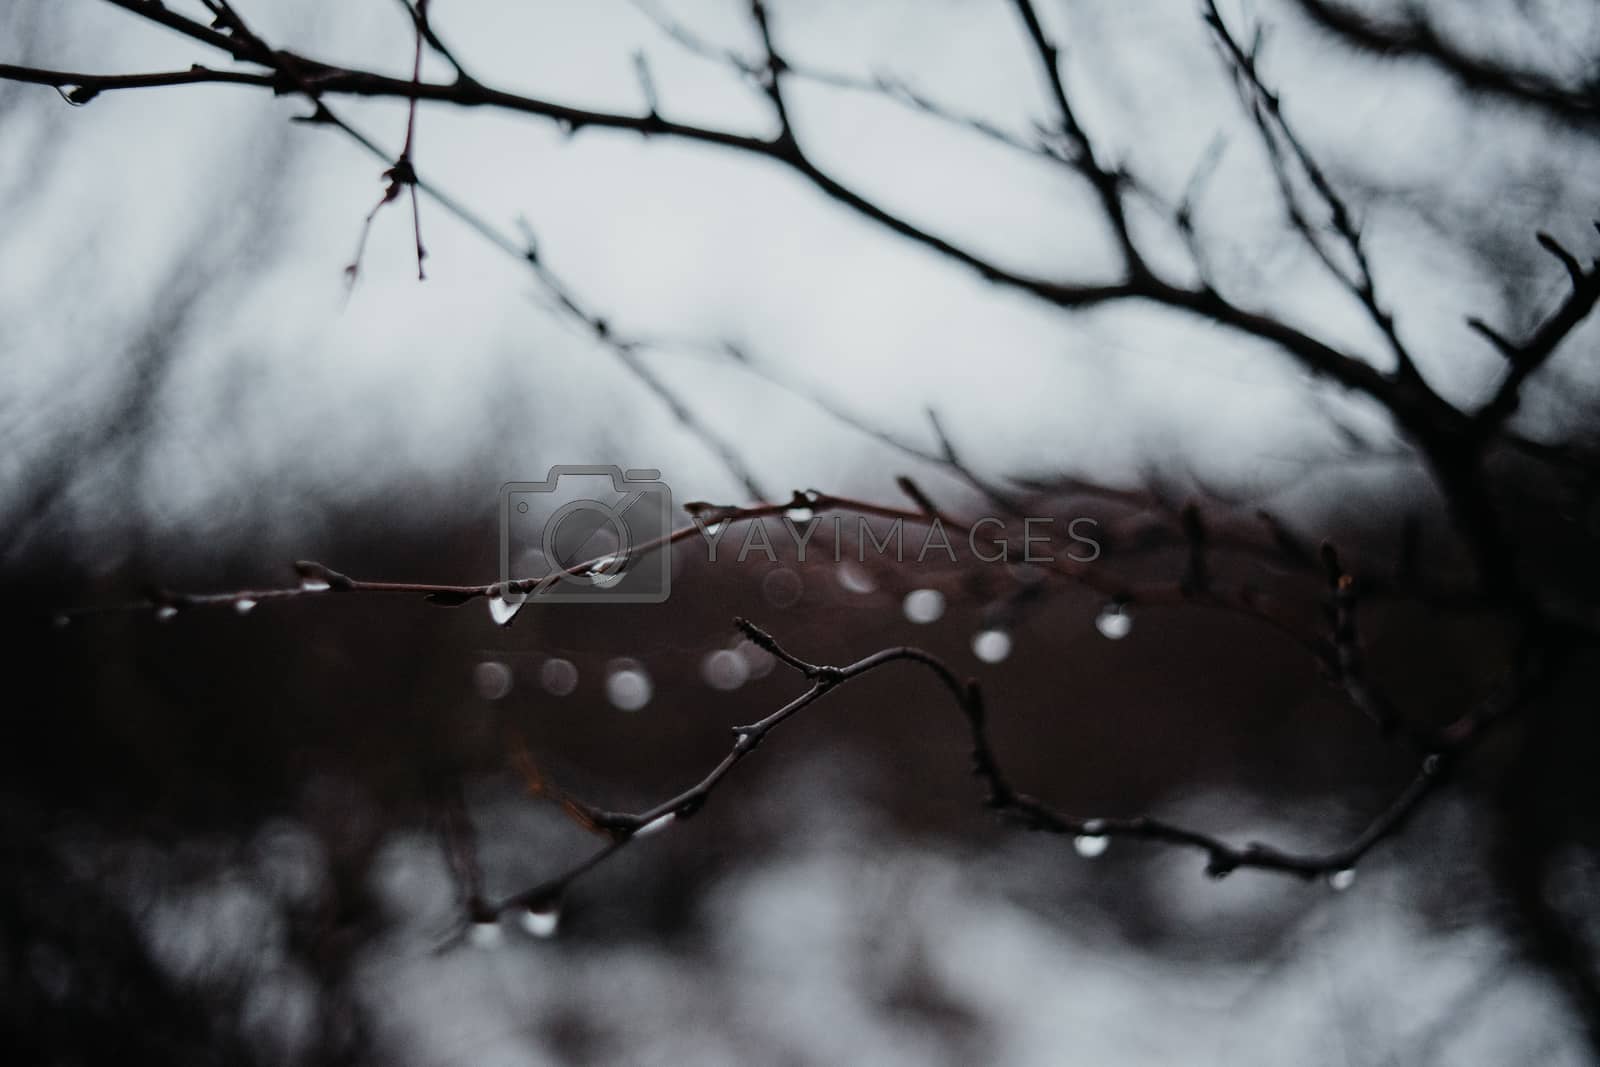 Royalty free image of Some branches in Iceland by ckreymborg